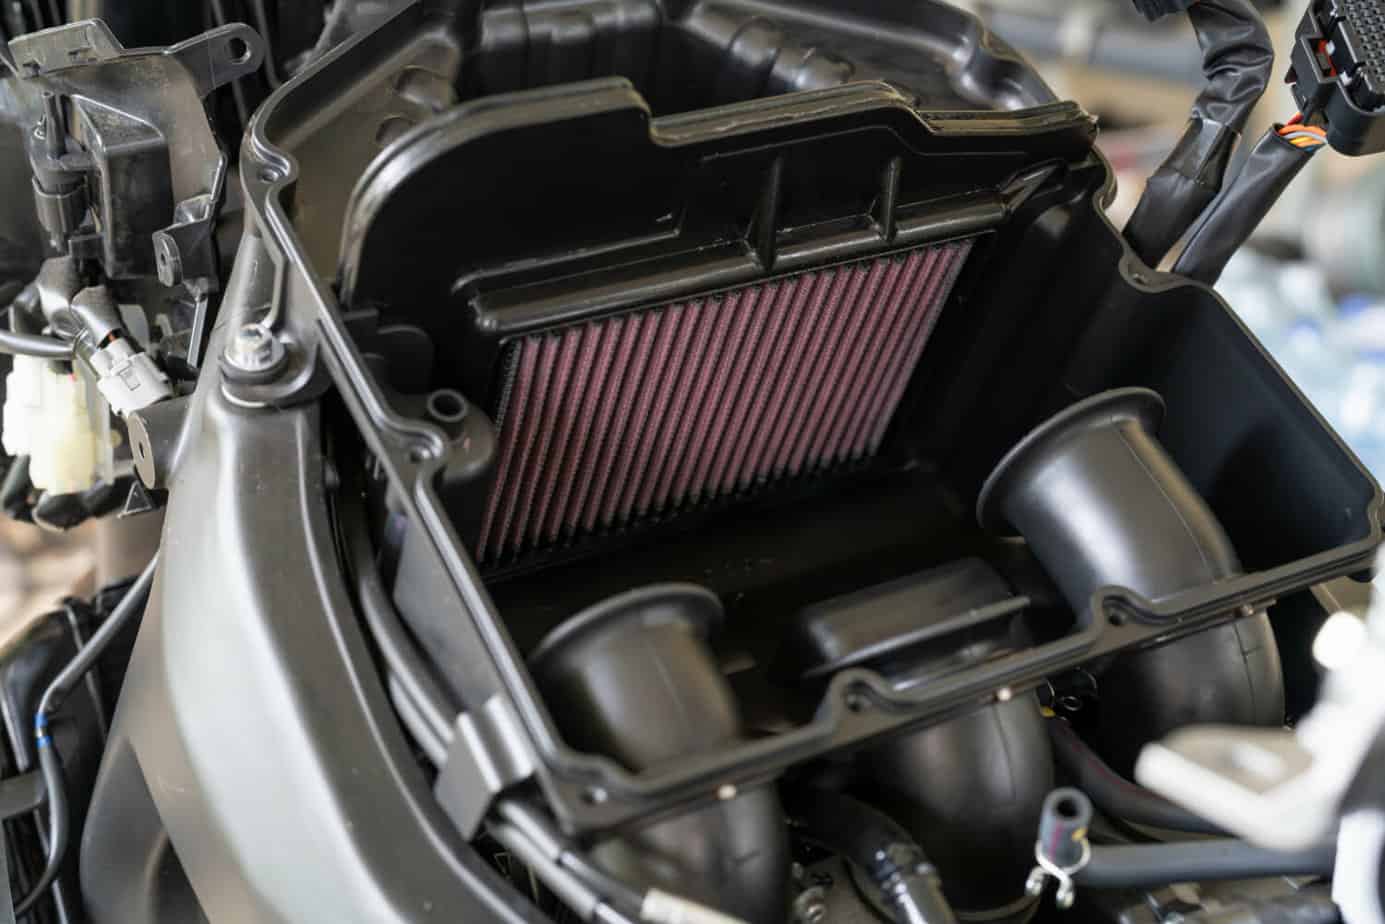 Best motorcycle air filter and cleaning kit